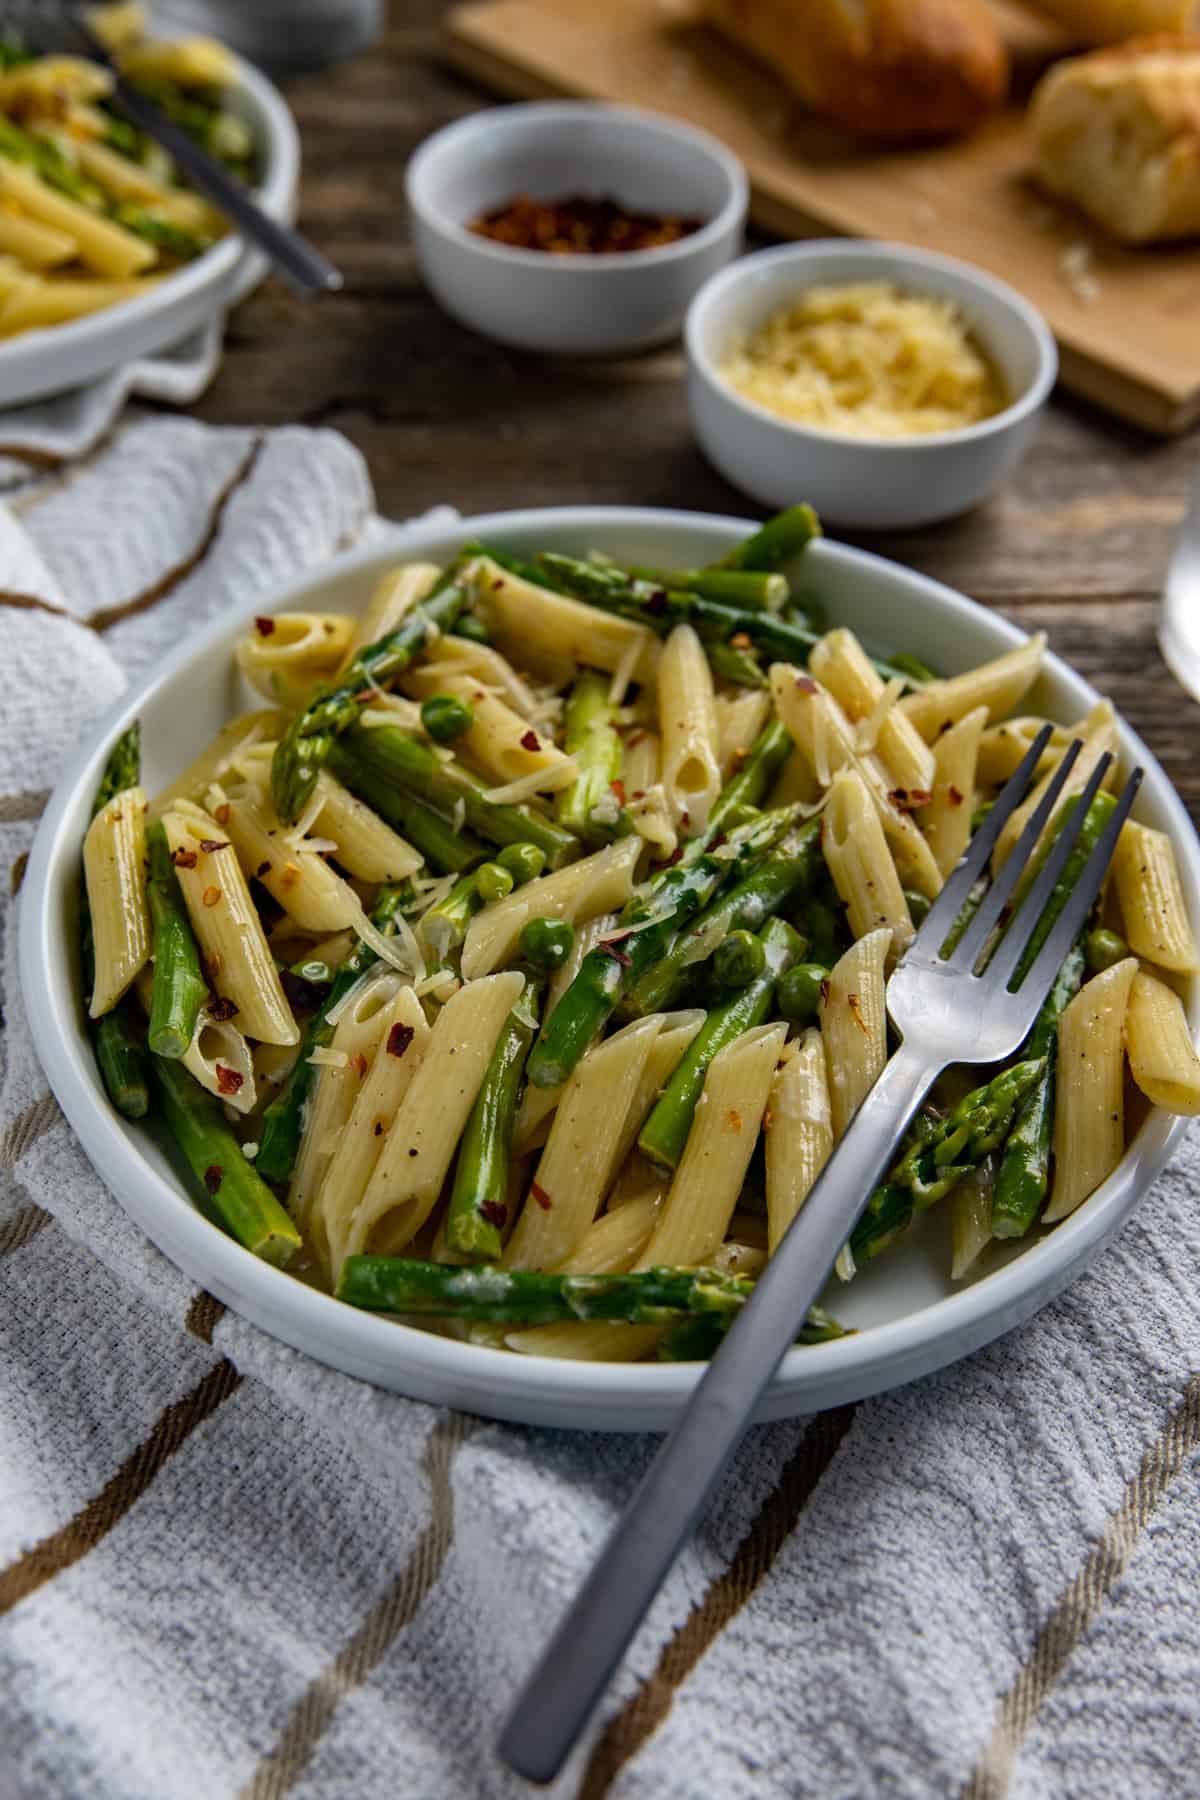 Cooked penne pasta with asparagus and sweet peas tossed in lemon garlic sauce and topped with parmesan cheese.  In a white bowl with fork.  French bread, extra cheese, and extra crushed red pepper in the background.